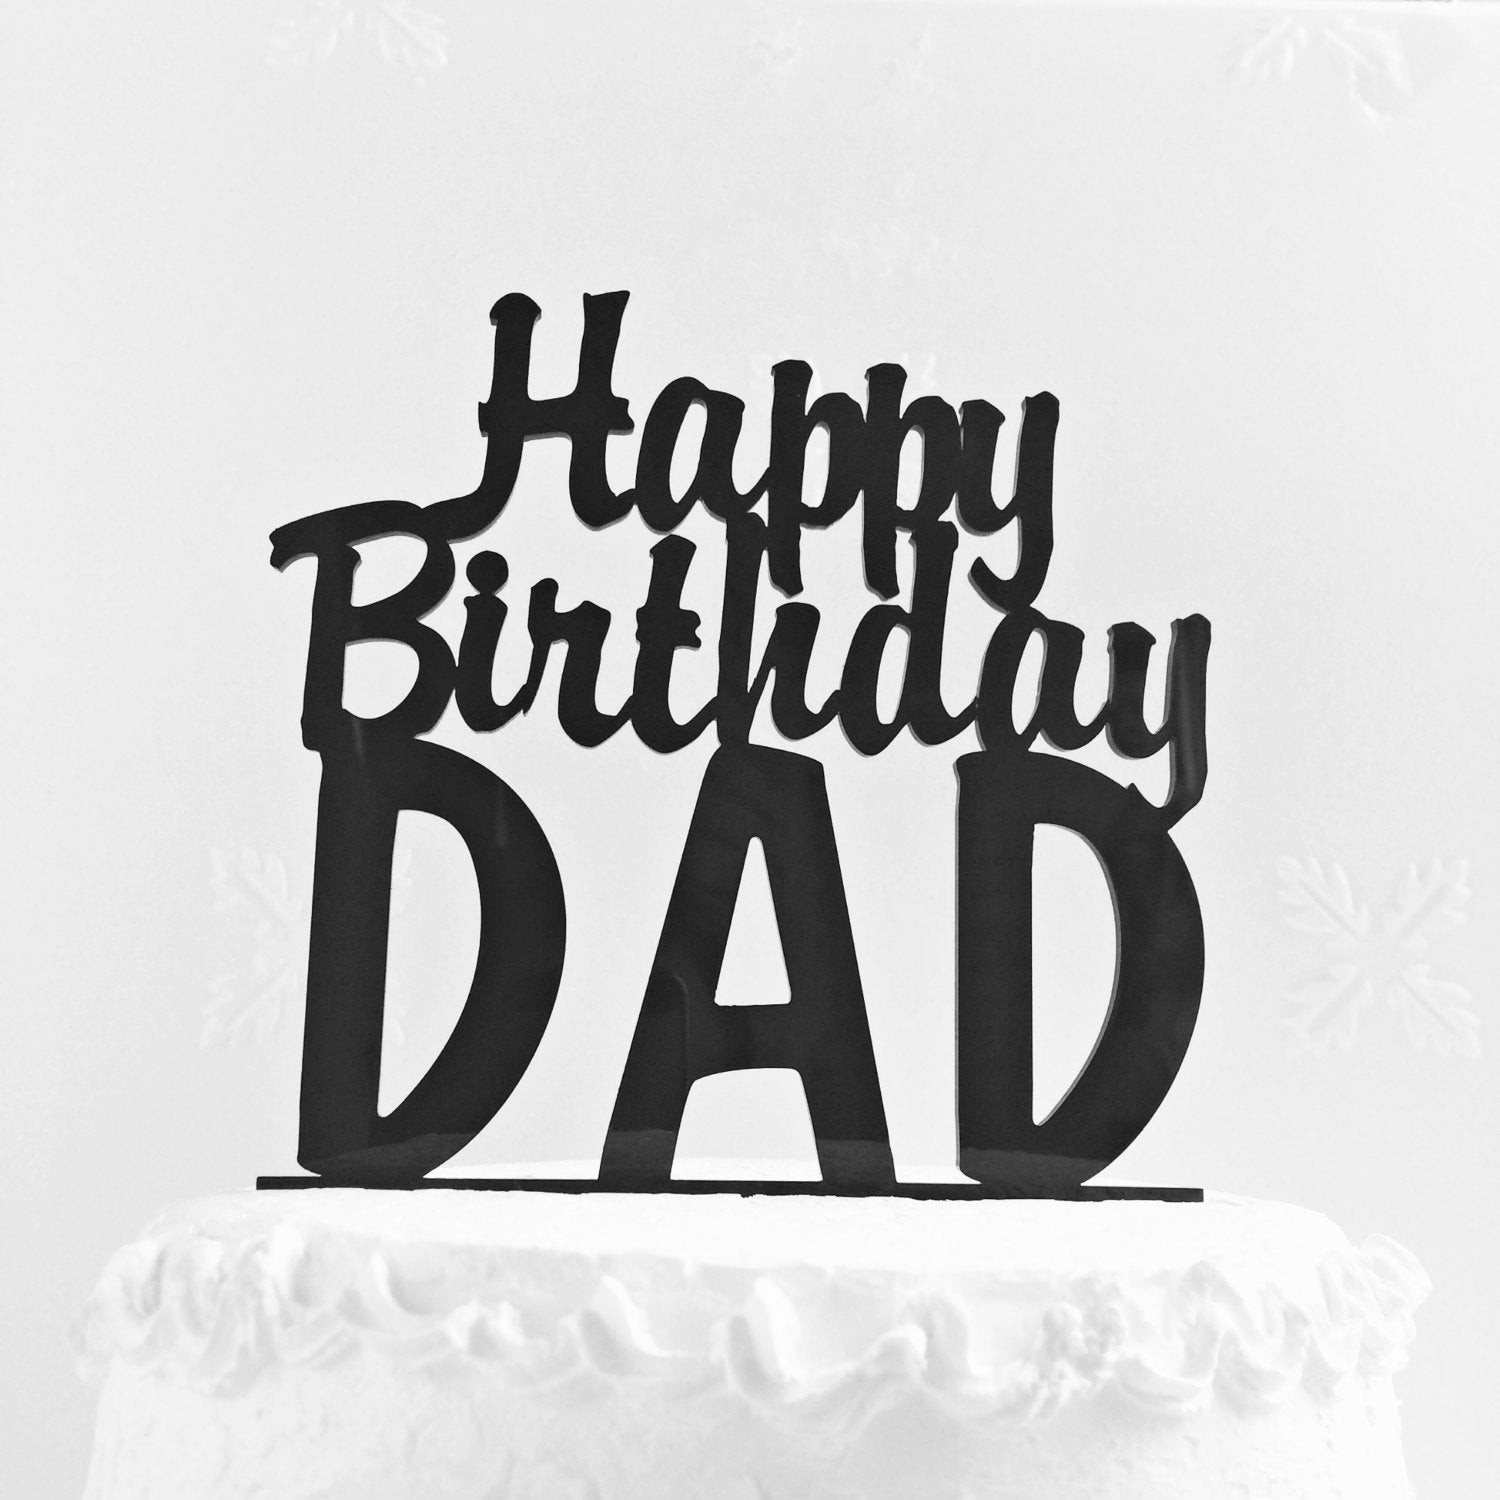 Happy Birthday Dad Cake
 Happy Birthday Dad Cake Topper Father s Day Cake Topper